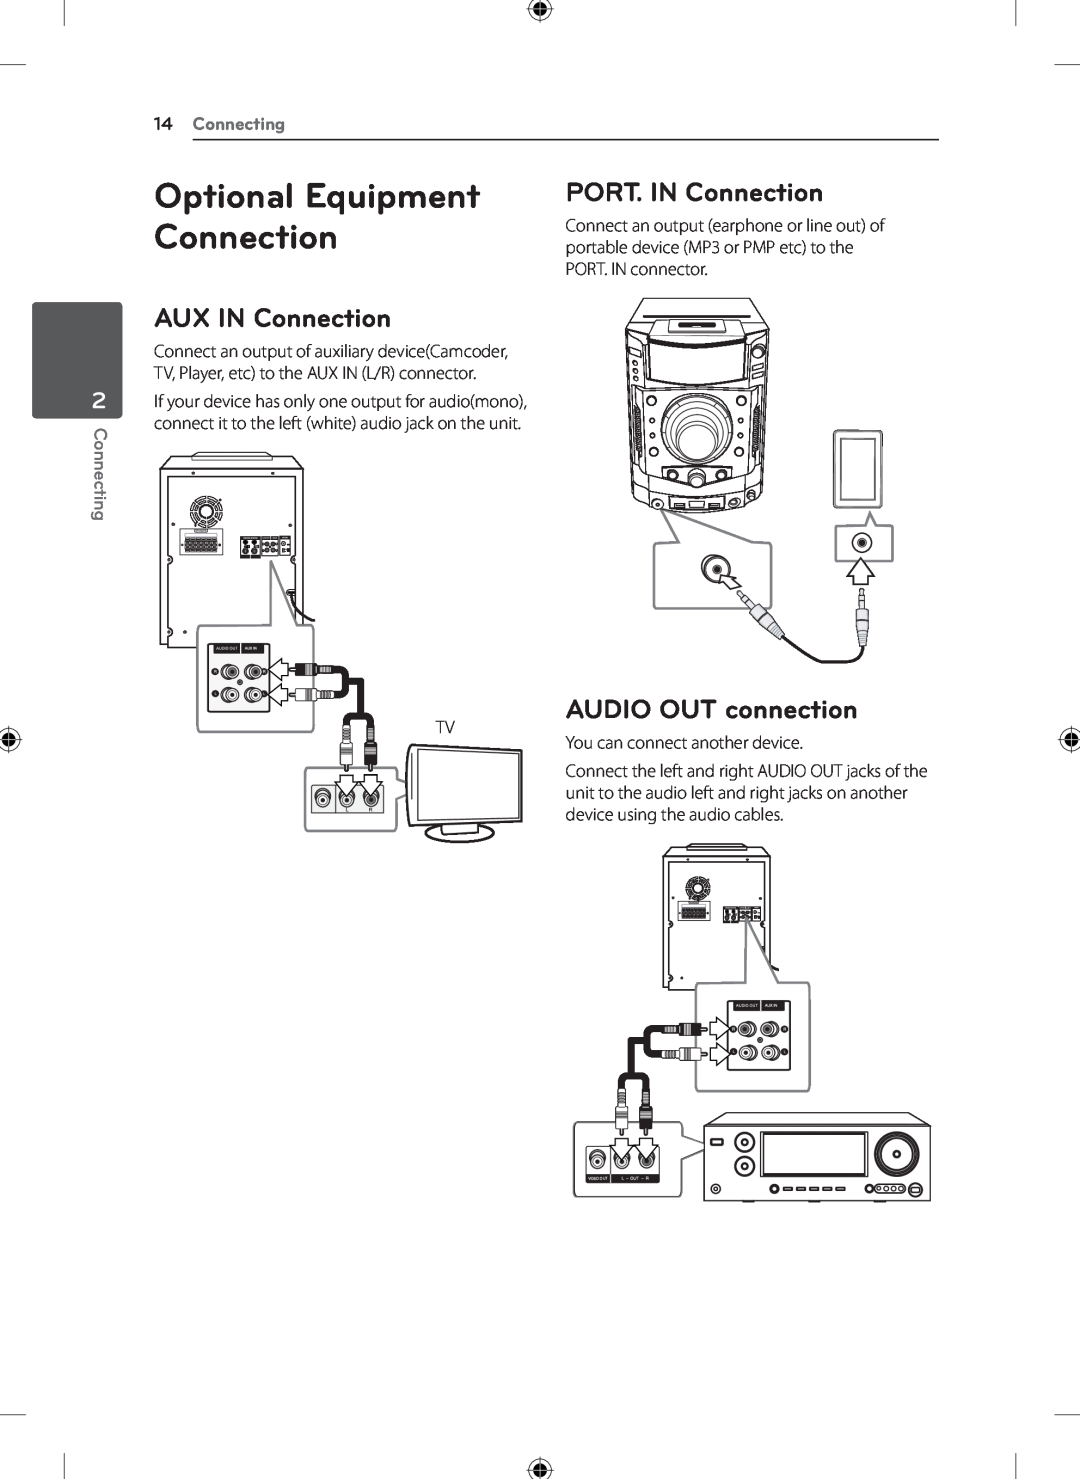 LG Electronics KSM1506 owner manual AUX IN Connection, PORT. IN Connection, AUDIO OUT connection, 14Connecting 